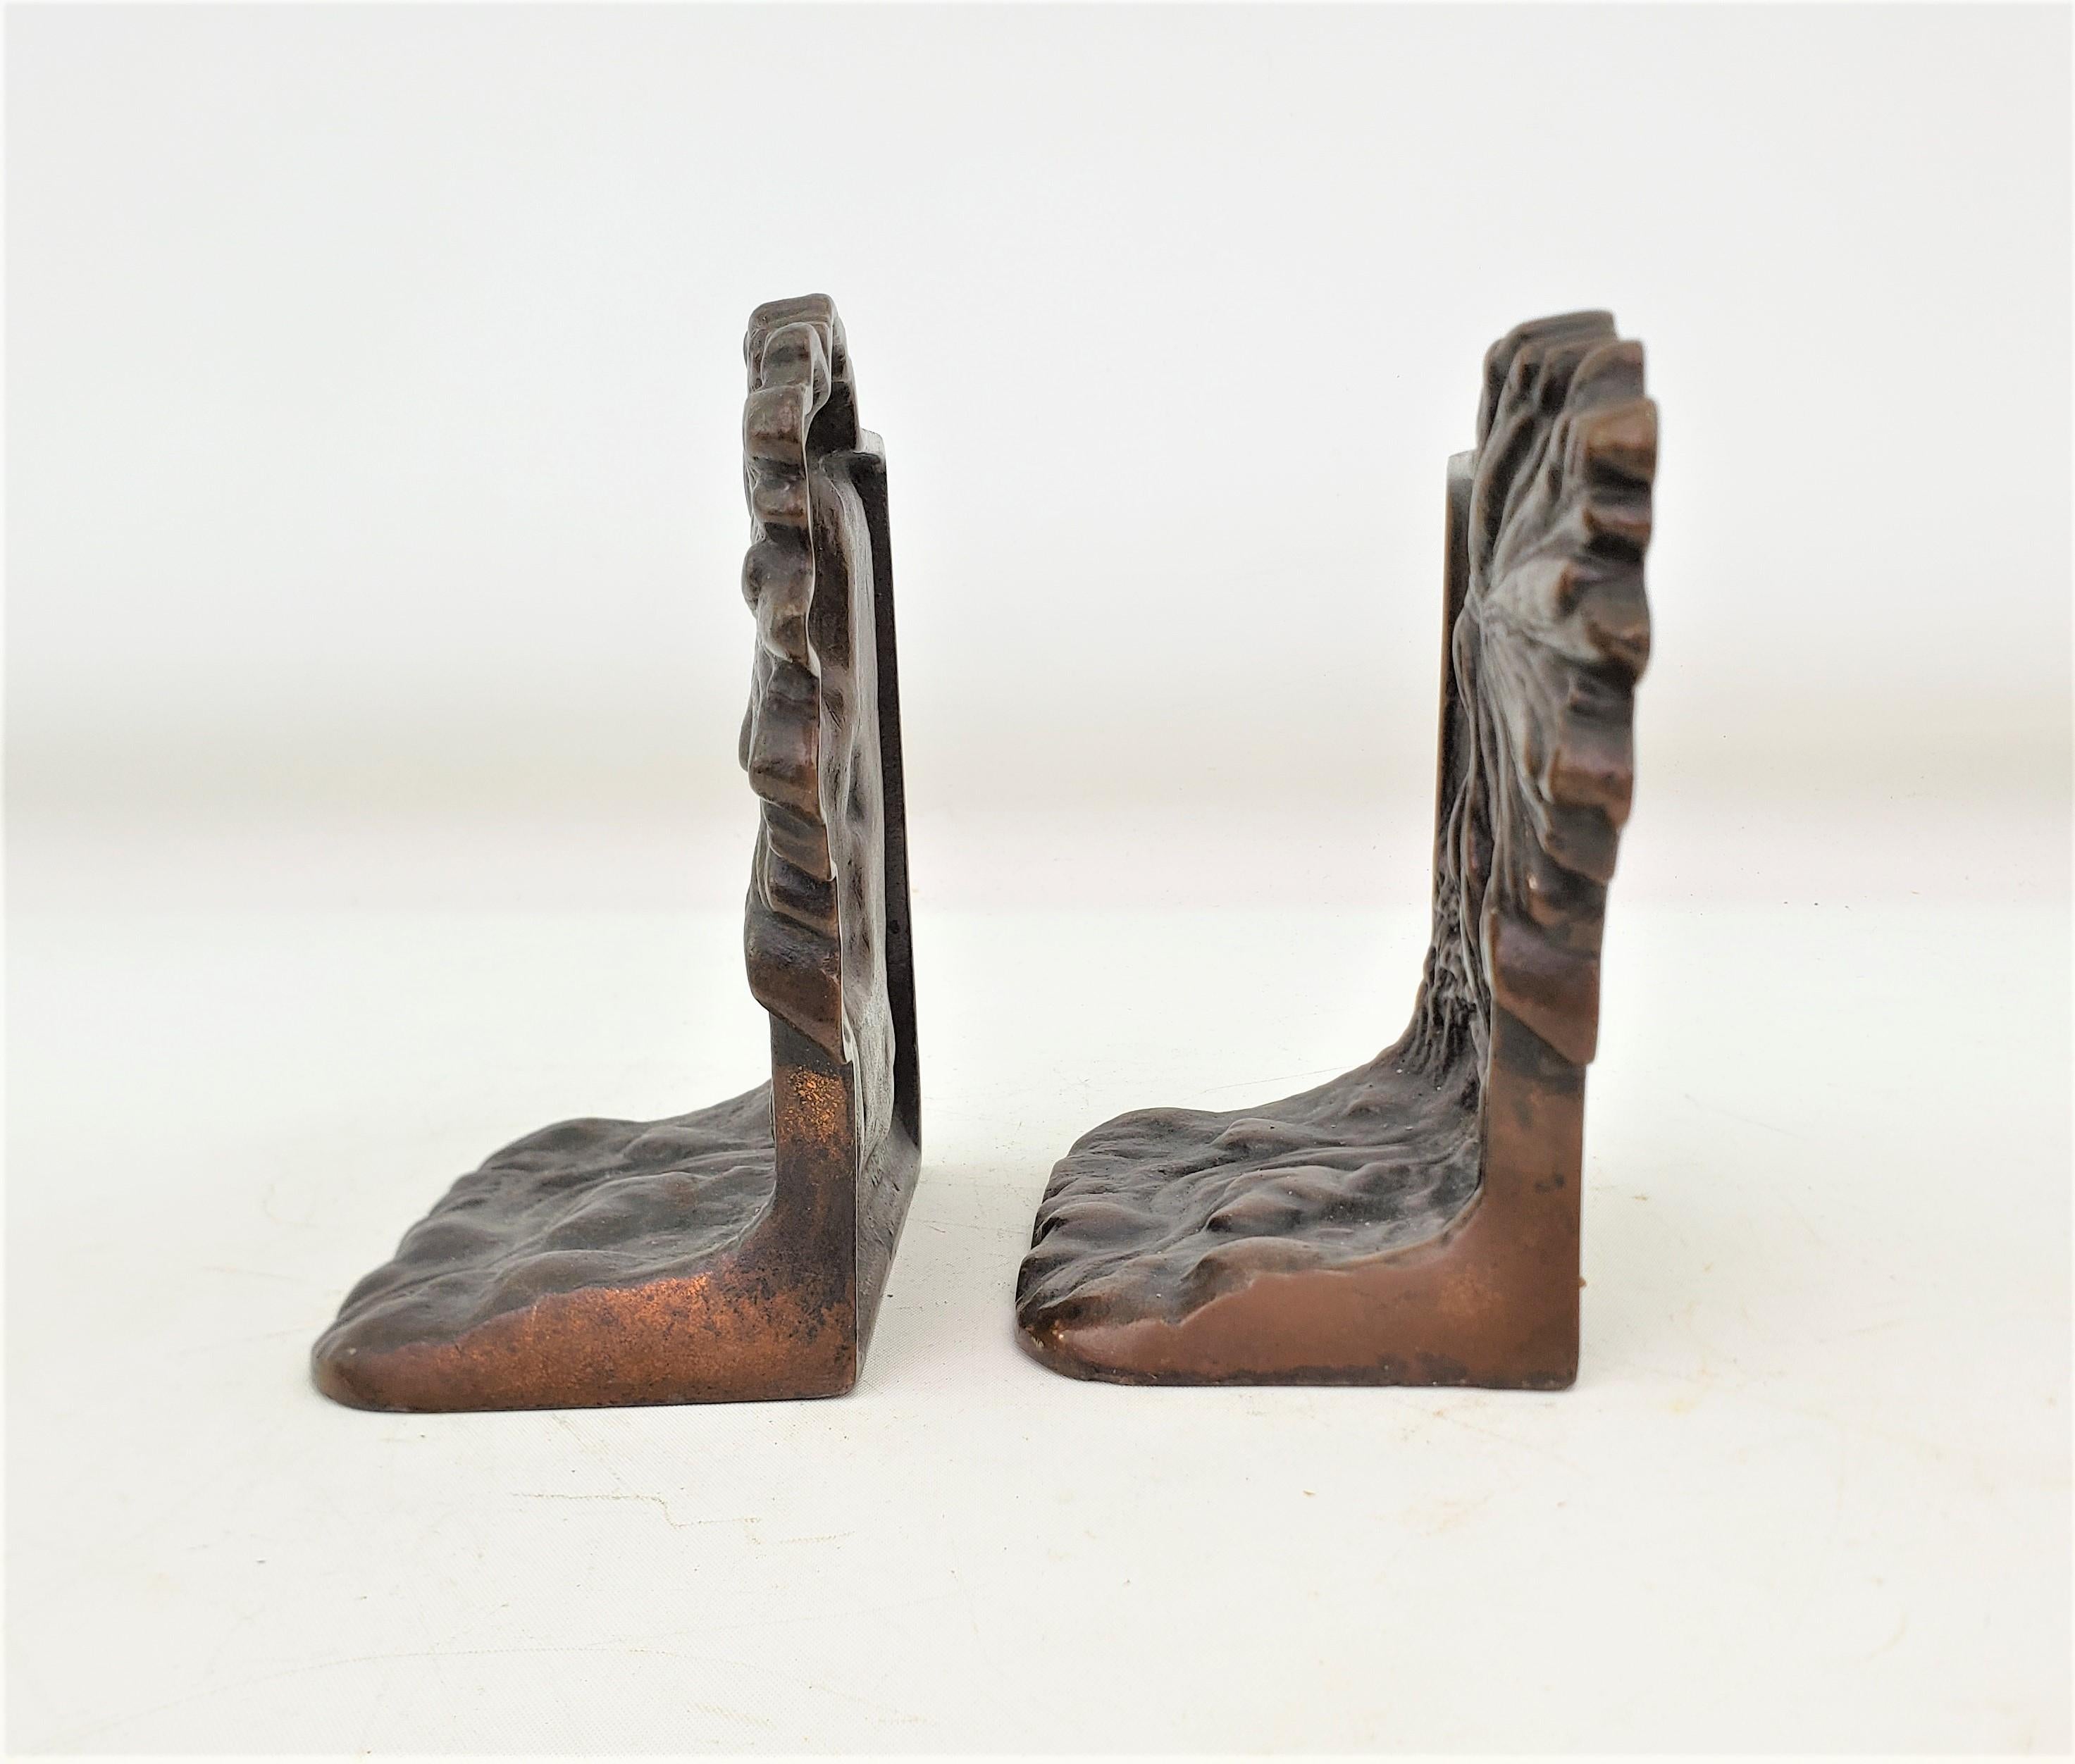 Steel Antique Art Deco Cast & Patinated Bookends Depicting an Indigenous Warrior For Sale